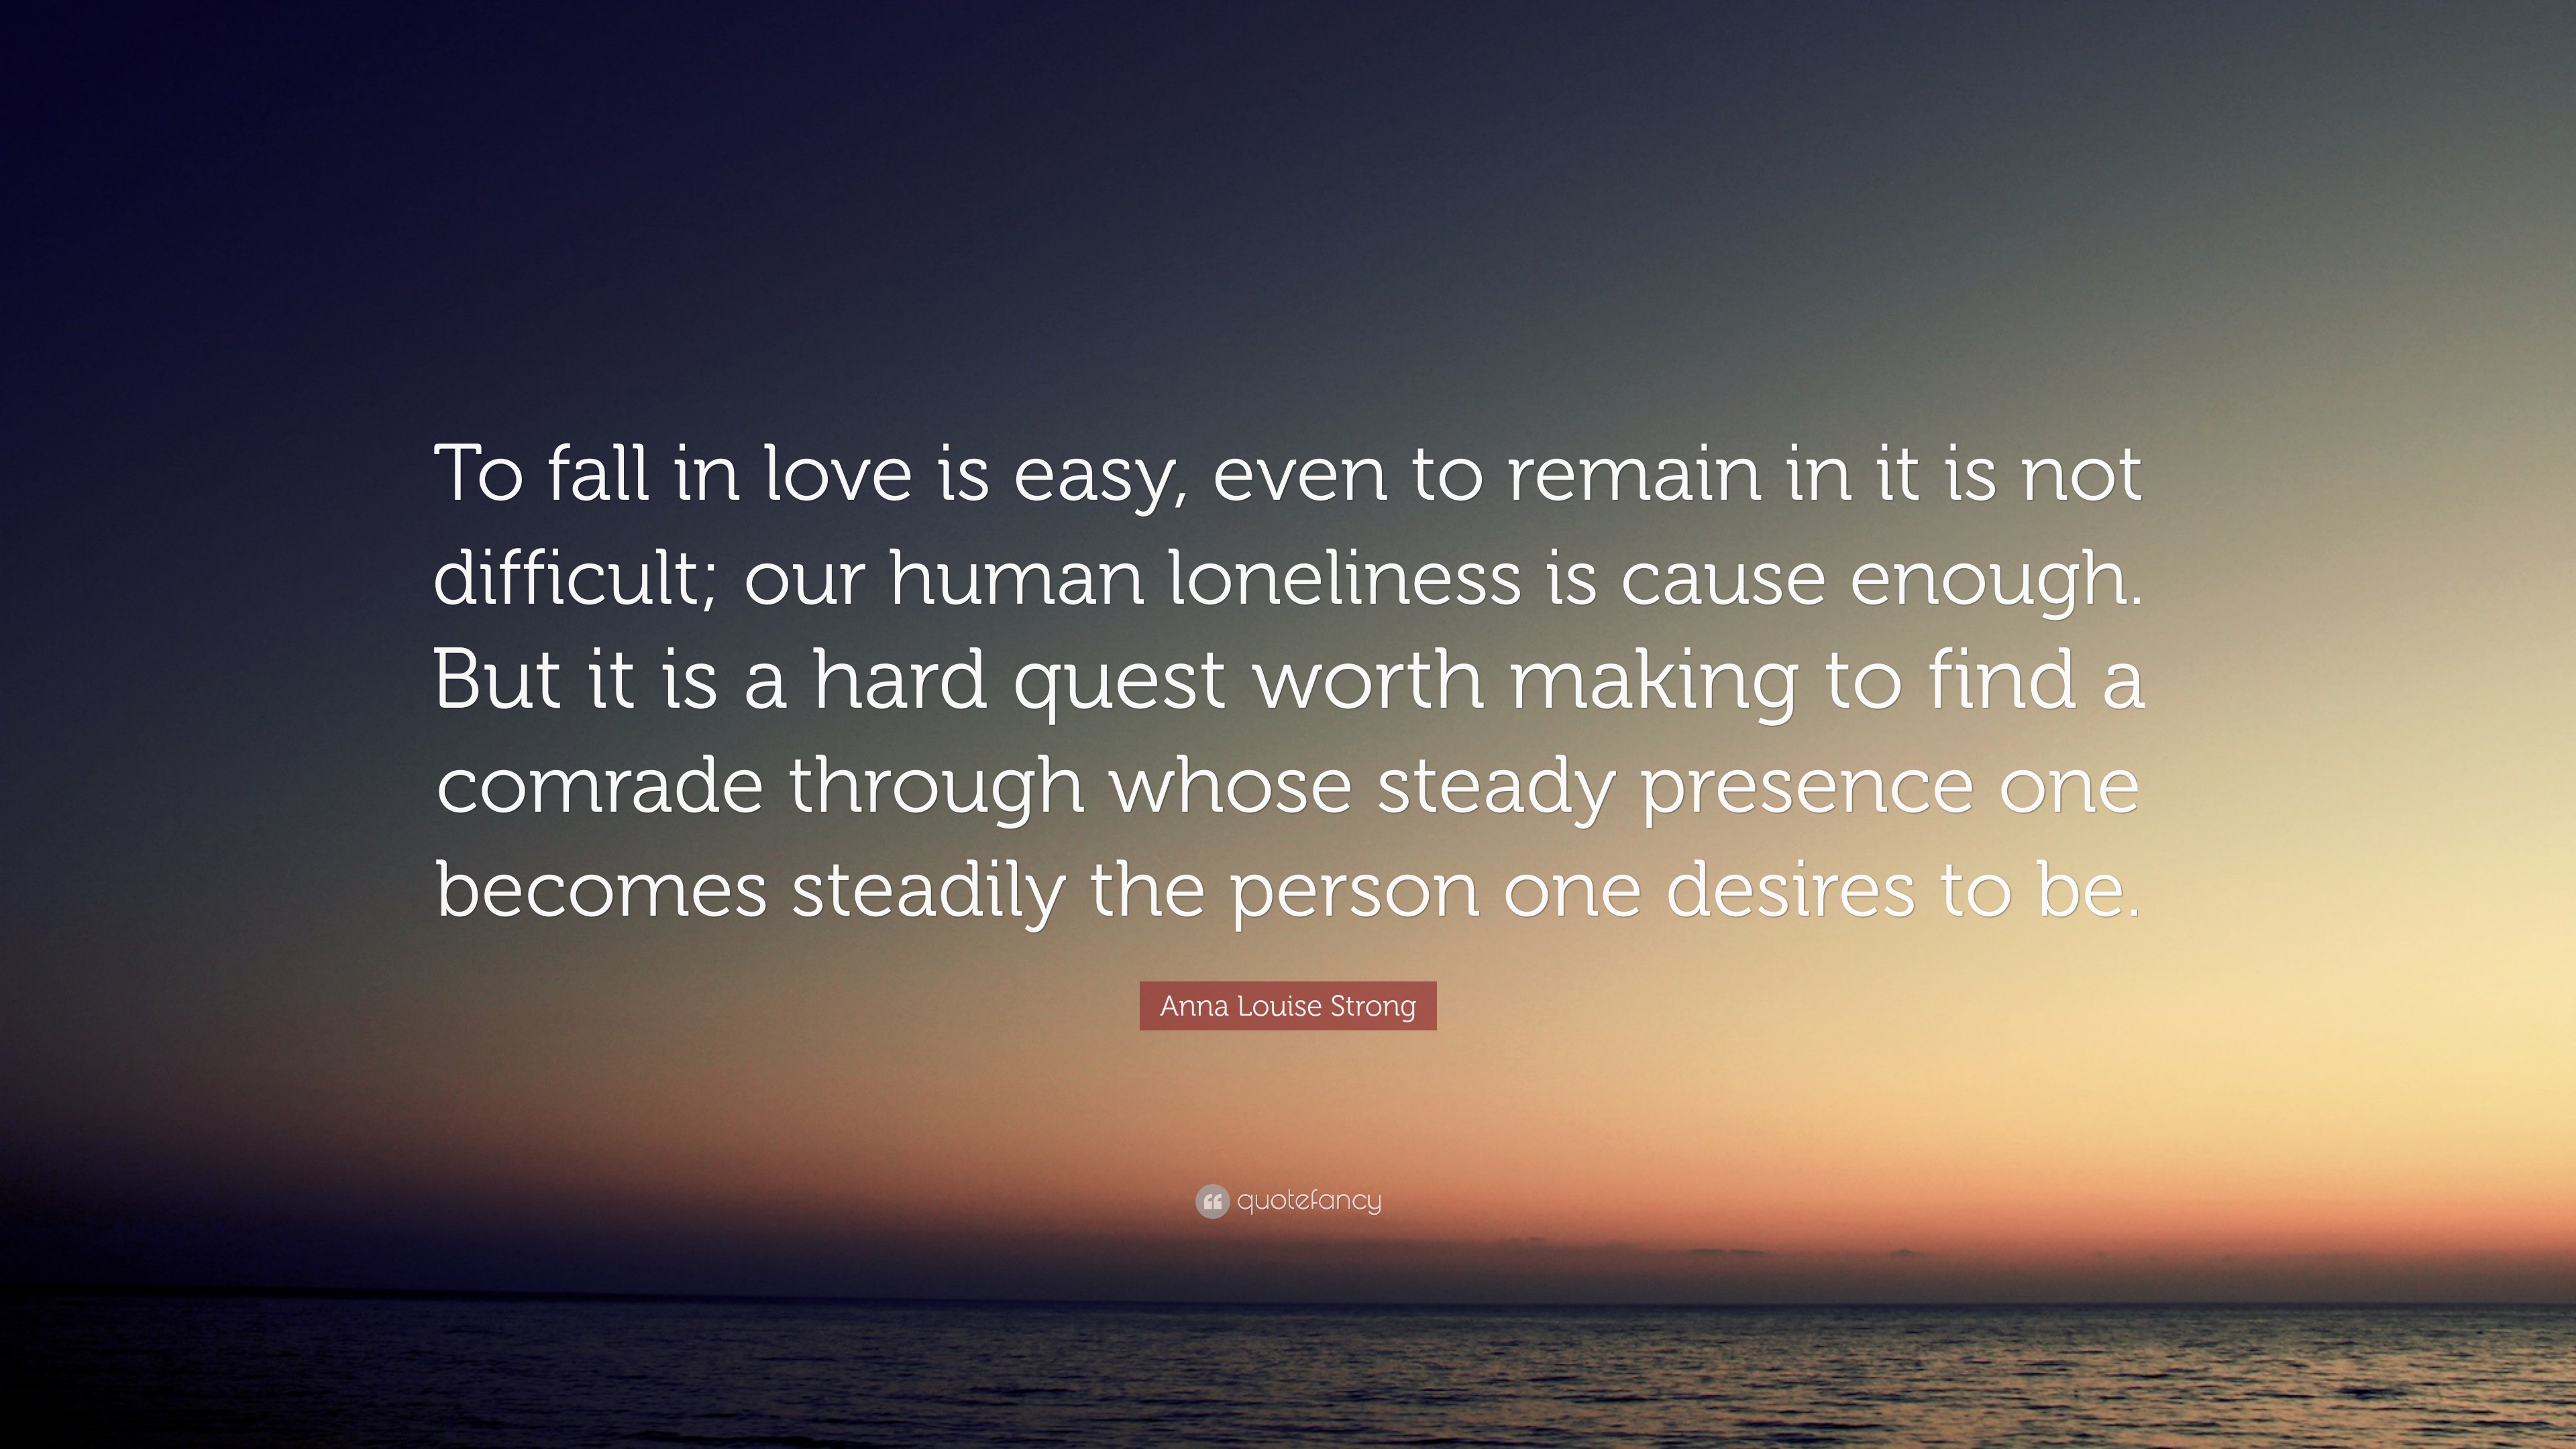 Anna Louise Strong Quote “To fall in love is easy even to remain